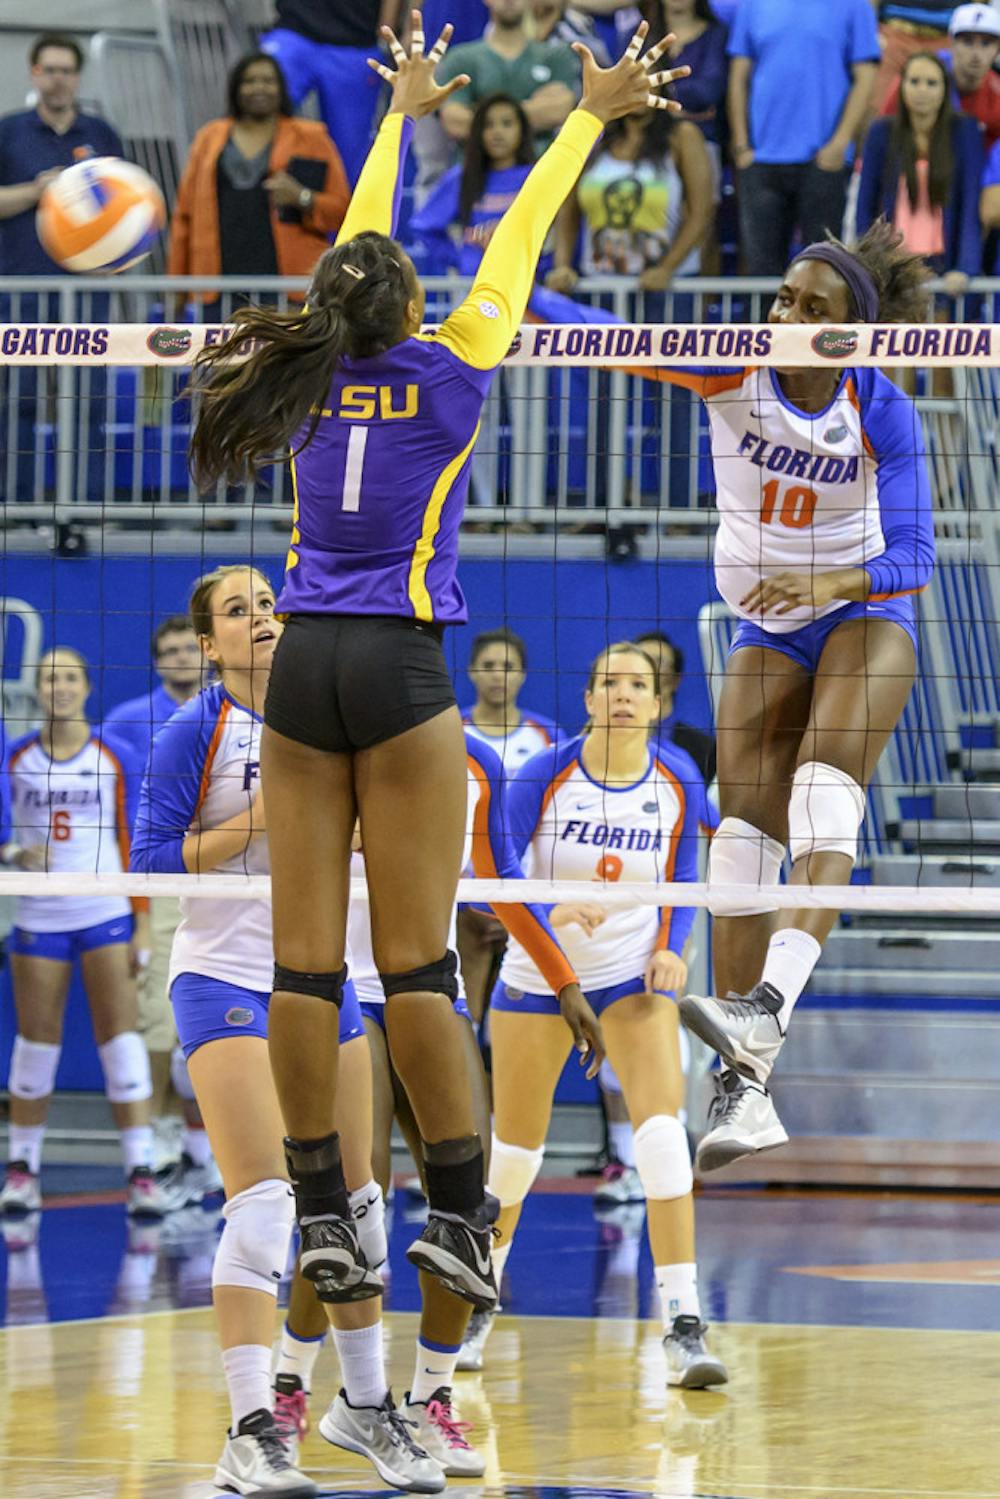 <p>Redshirt senior middle blocker Chloe Mann spikes the ball, after a set-up by fellow senior Taylor Brauneis, for the match-winning kill during No. 7 Florida's sweep of LSU on Friday night in the O'Connell Center.</p>